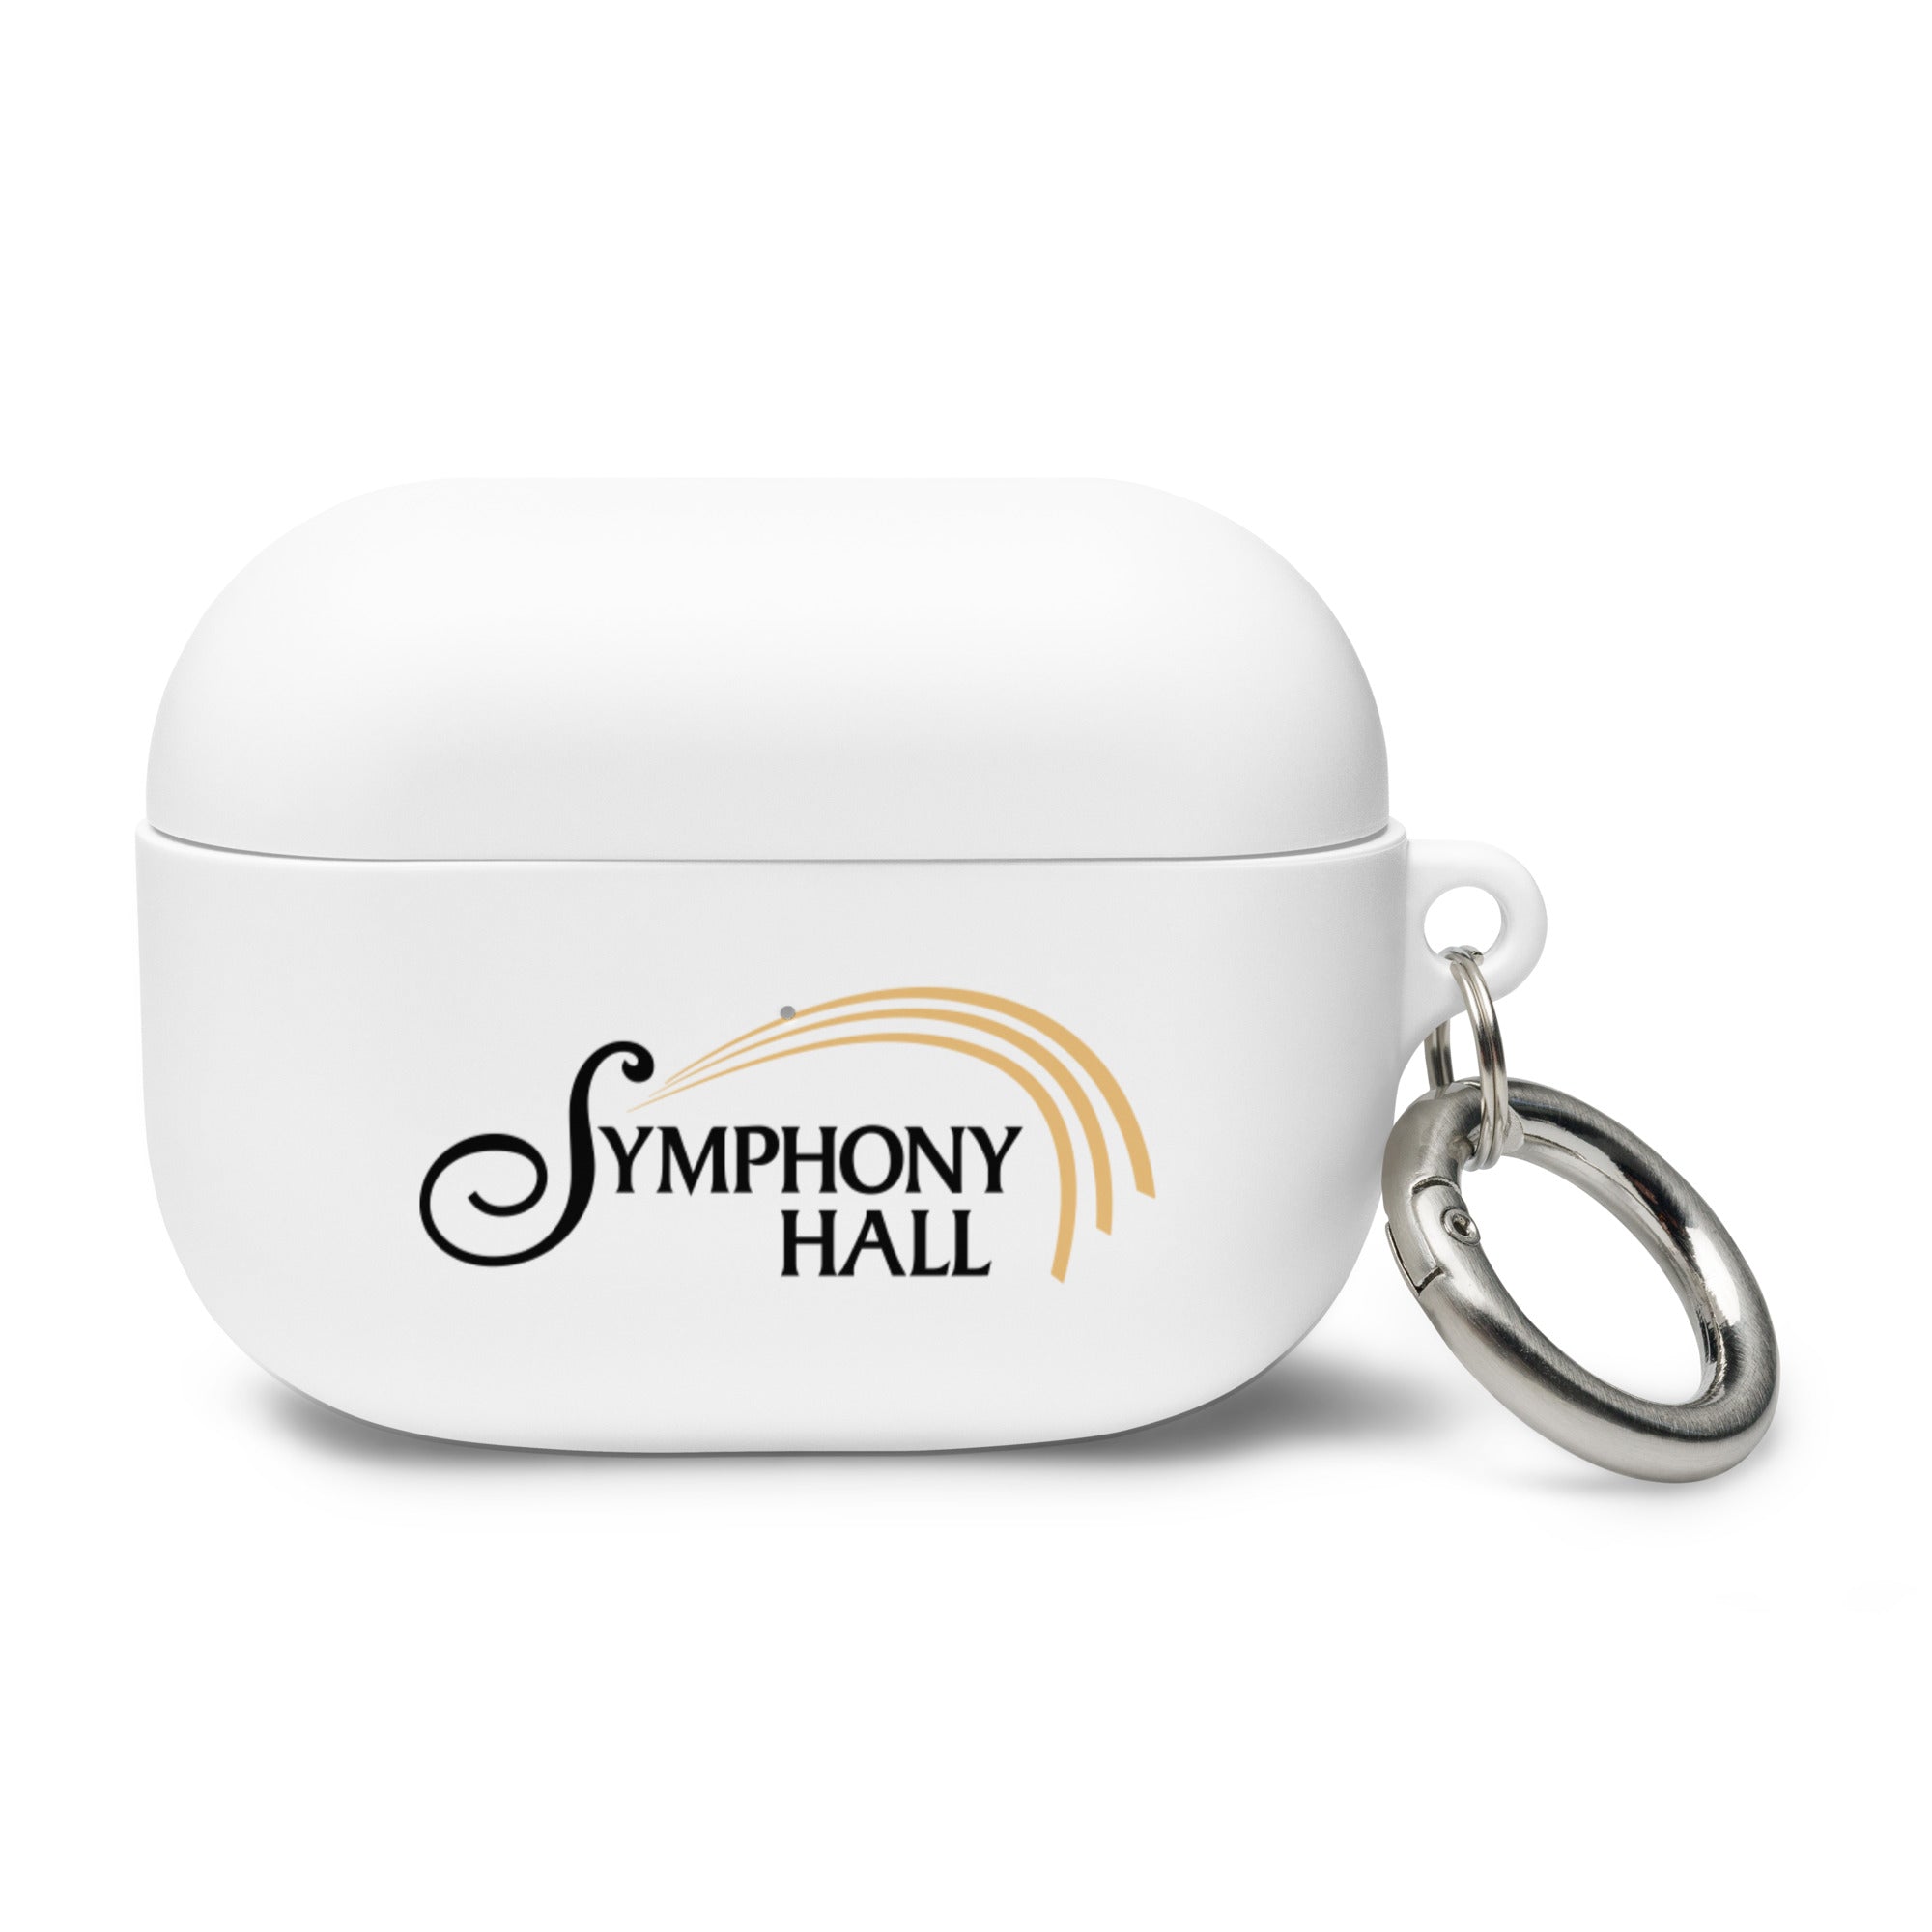 Symphony Hall: AirPods® Case Cover